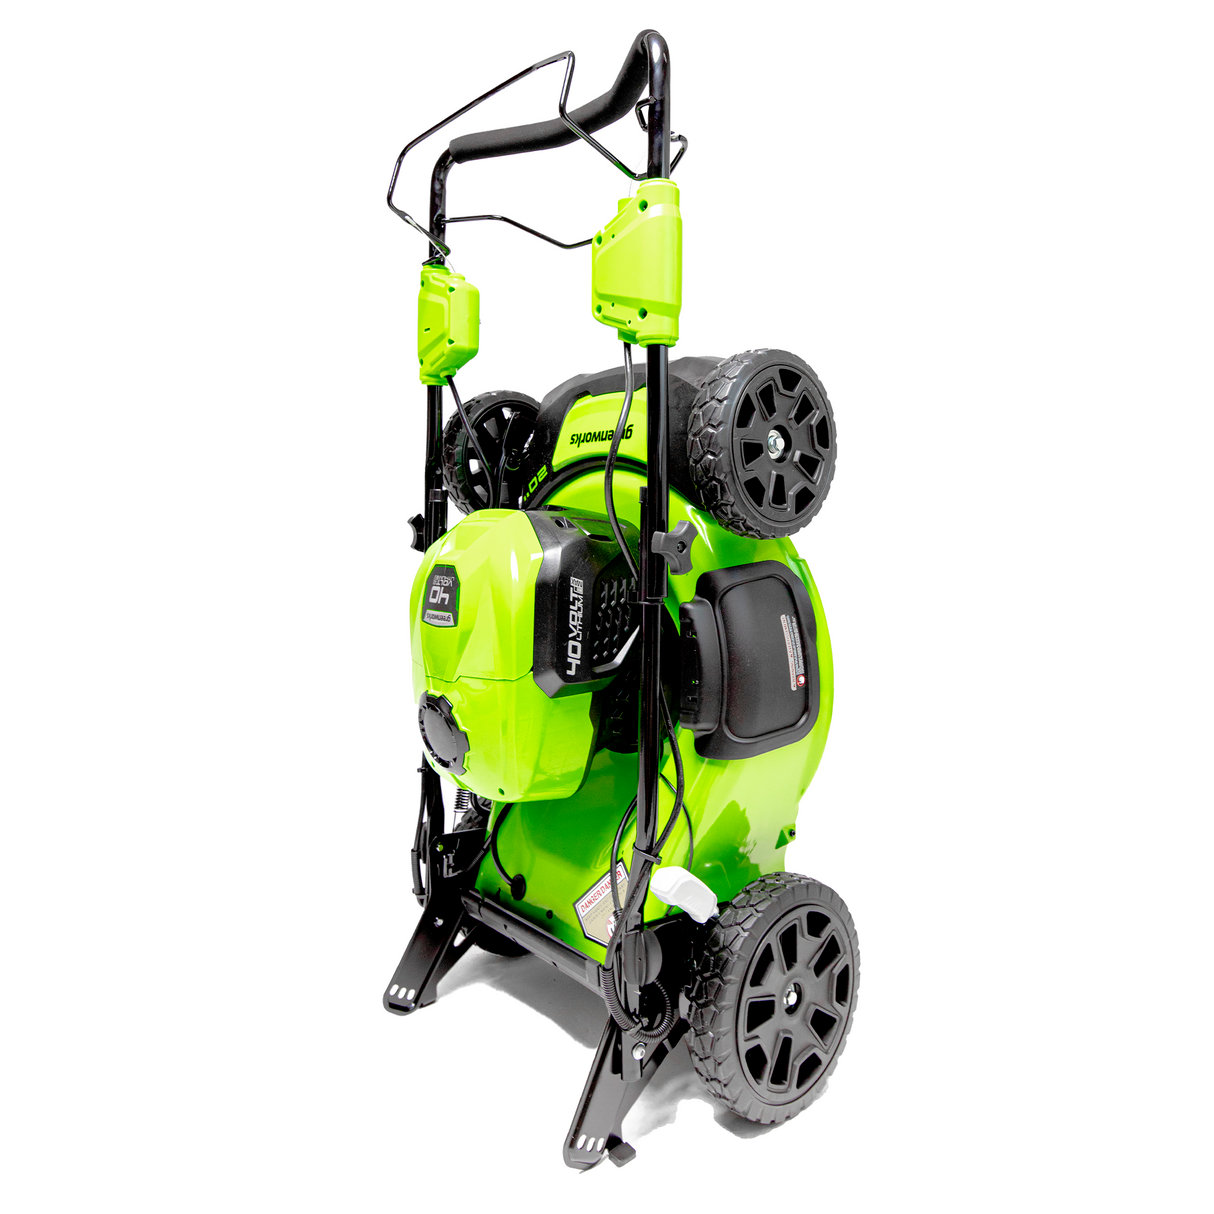 40V 20" Self-Propelled Mower & 40V 12" String Trimmer Combo Kit, 5.0Ah Battery and Charger Included